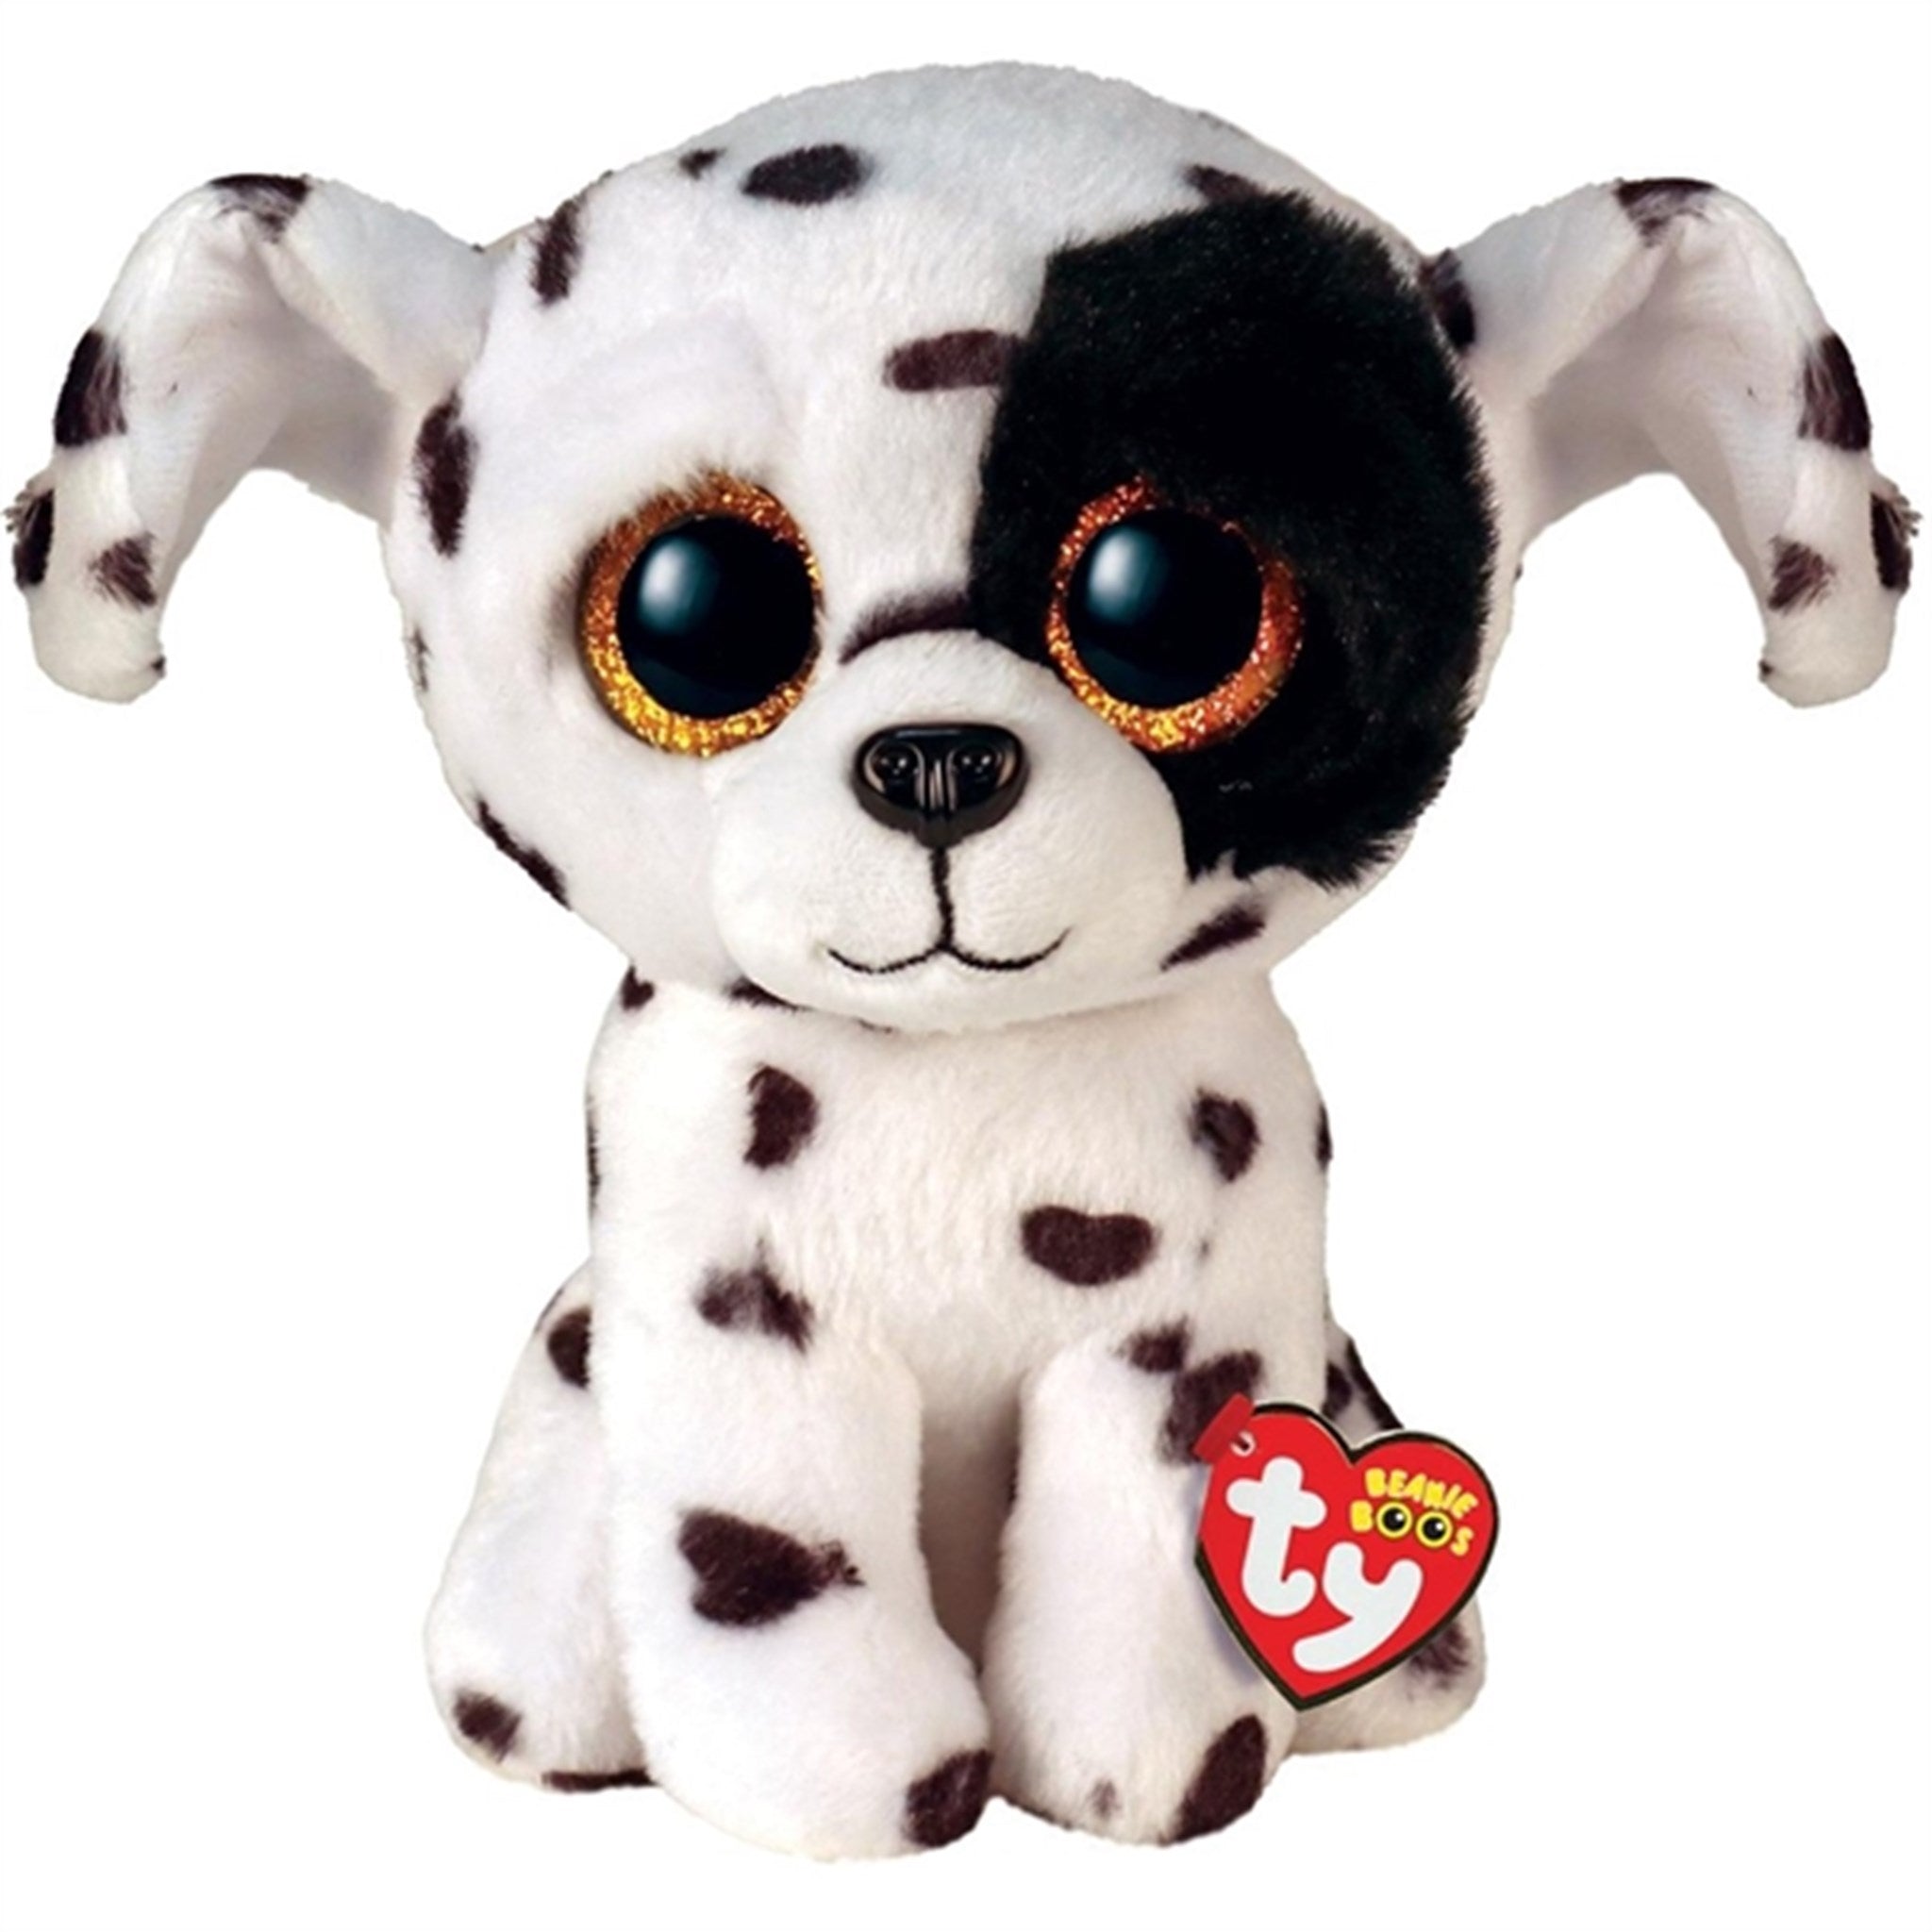 TY Beanie Boos Luther - Spotted Dog Reg